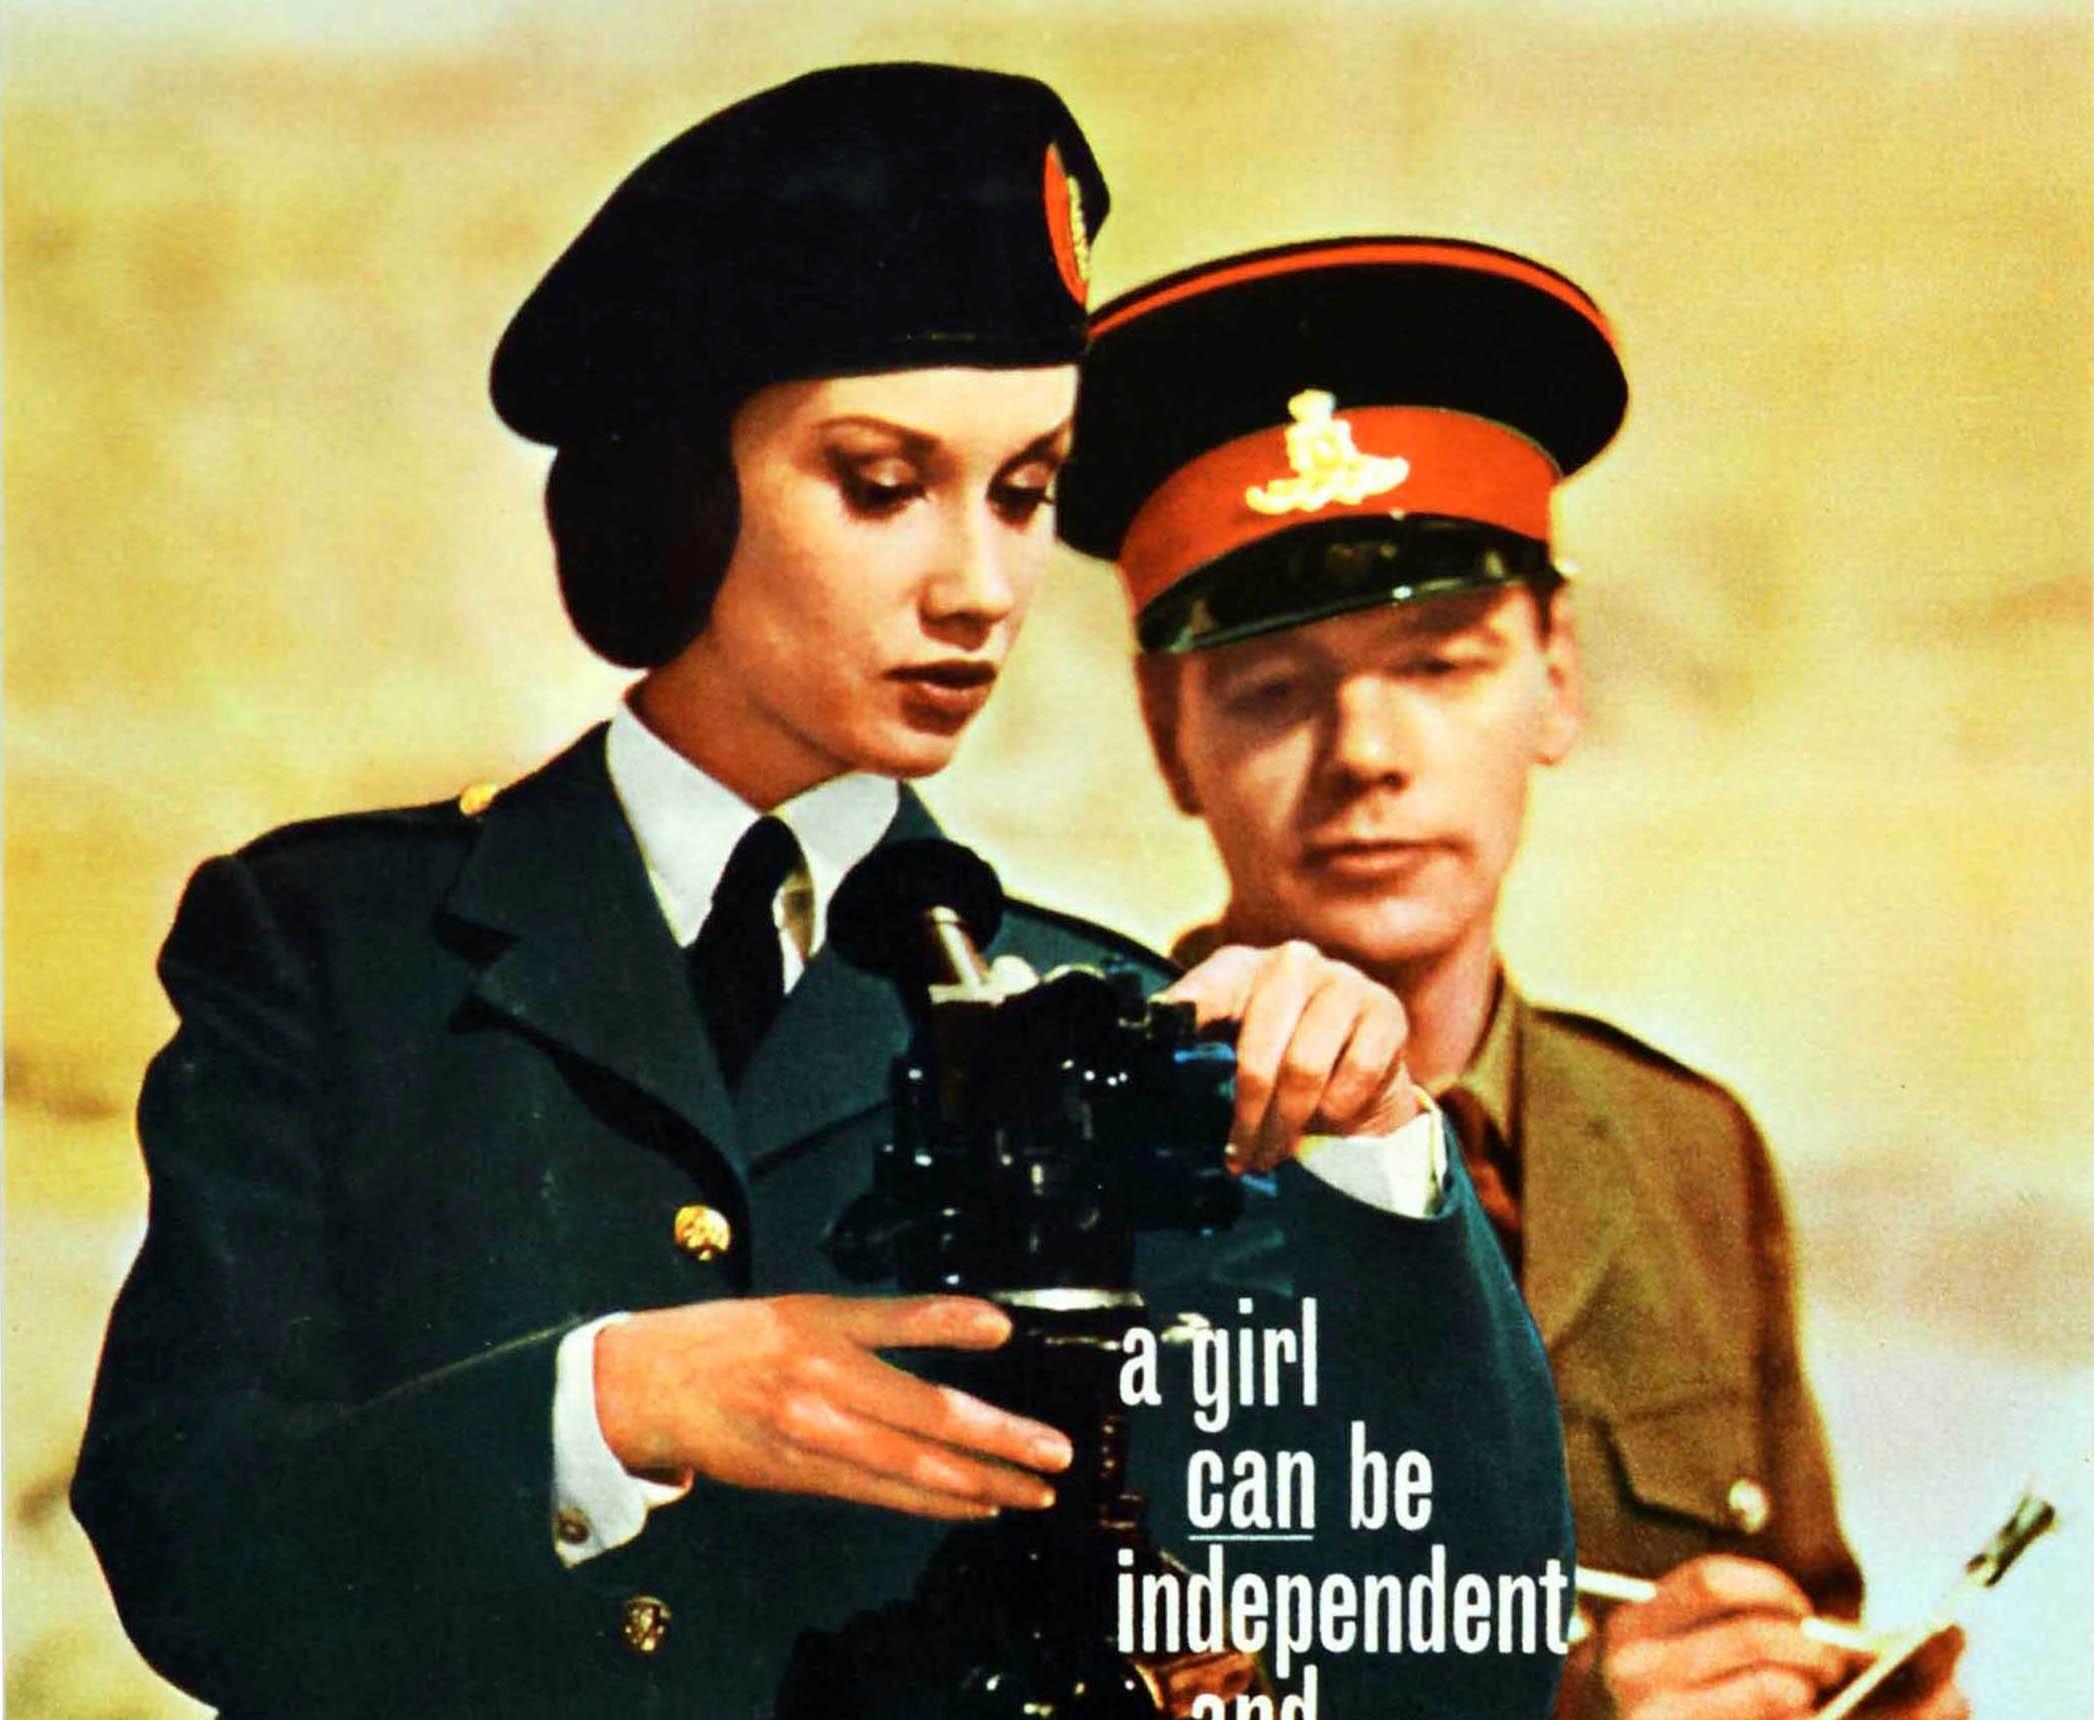 Original Vintage Poster You'll Be Happy In The WRAC Women's Royal Army Corps - Print by Unknown